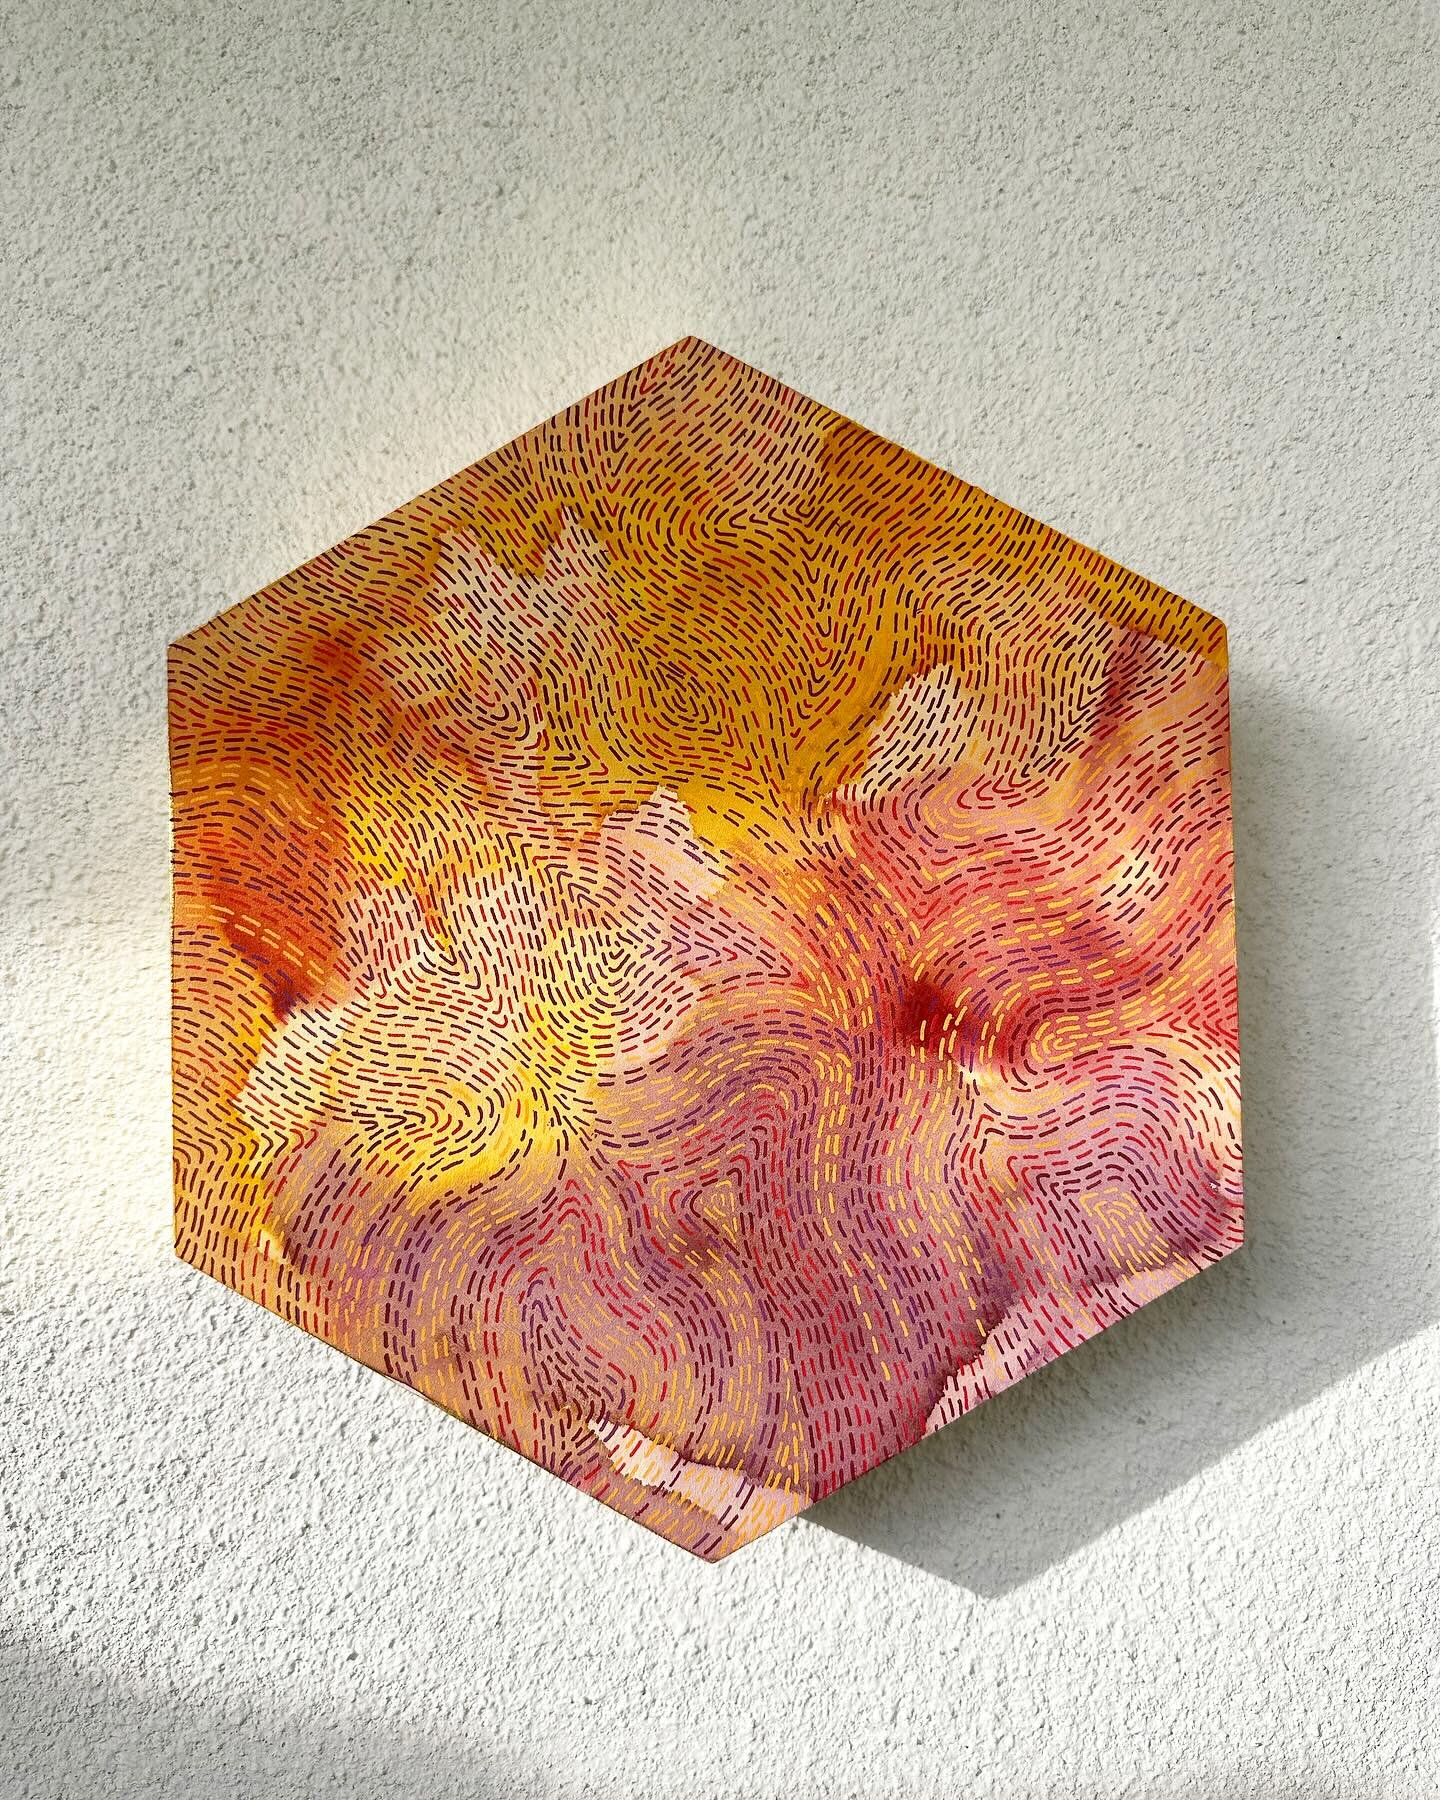 New hexagon piece in warm shades of yellow, orange and maroon. Worked on it in the airplane! Mastering doing art in public spaces 😁

#artistsoninstagram #colorpalette #choosingcolors #artistconnect #overthinkersclub #huemotional #paintingprocess #ar